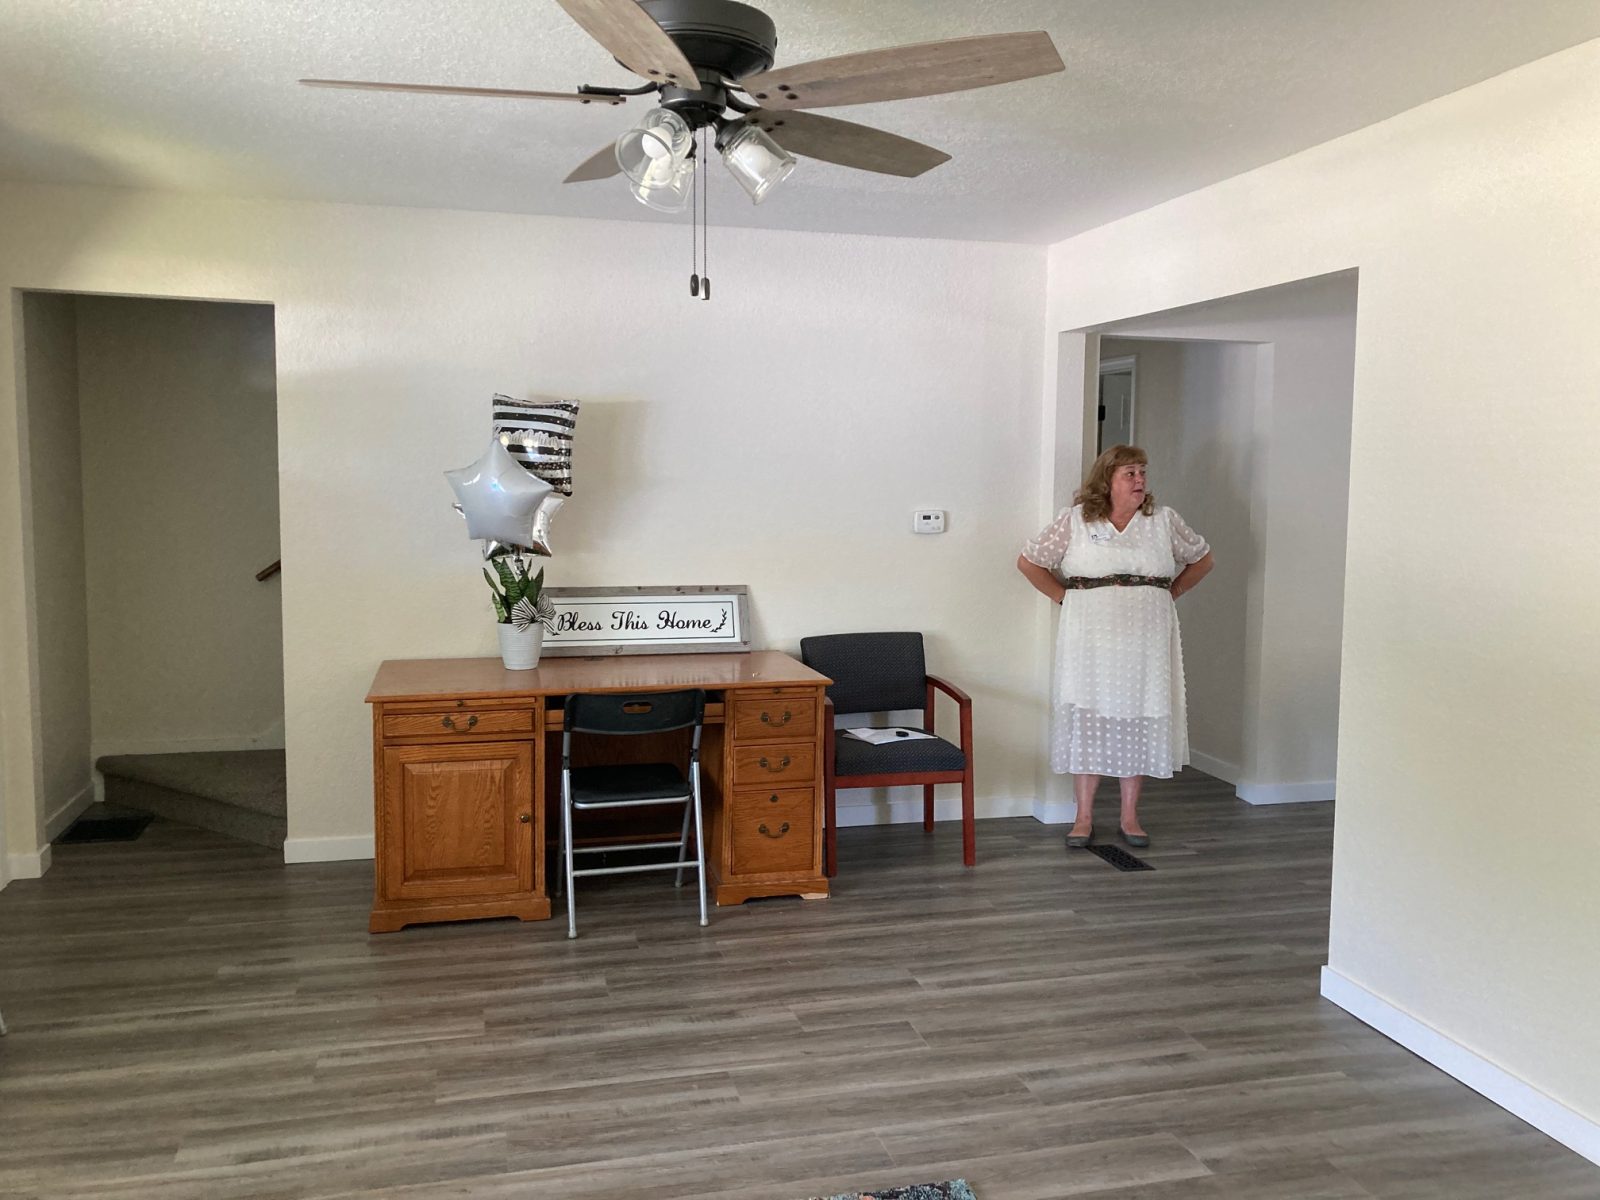 Abigail Cool, executive director of the Women's Medical Respite, stands in the living room of the new location for the program.